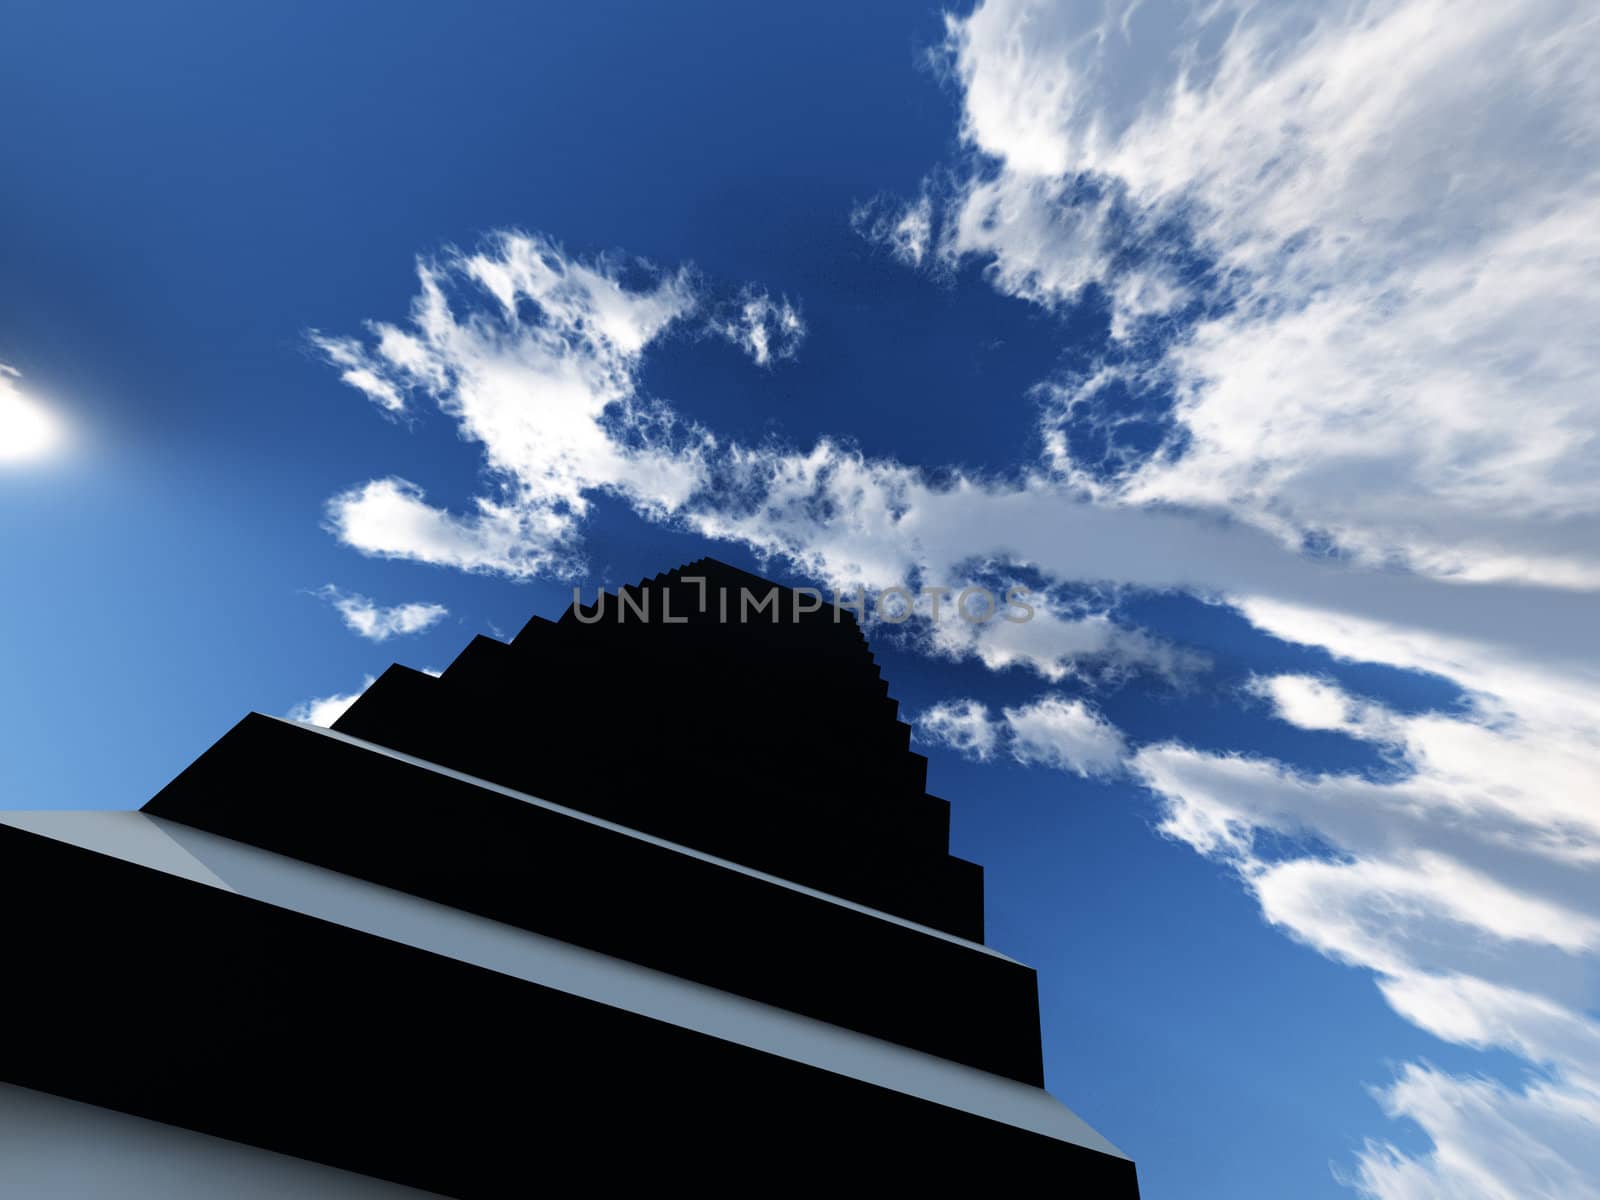 Conceptual image about a stairway to Heaven.